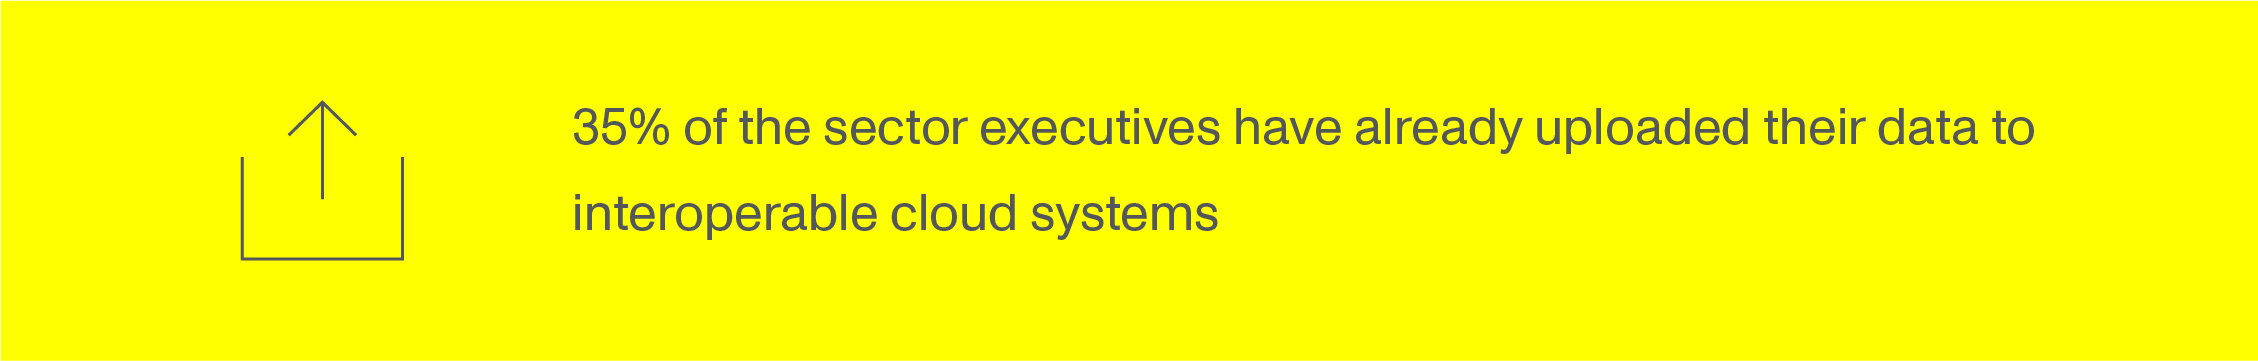 35% of the sector executives have already uploaded their data to interoperable cloud systems.